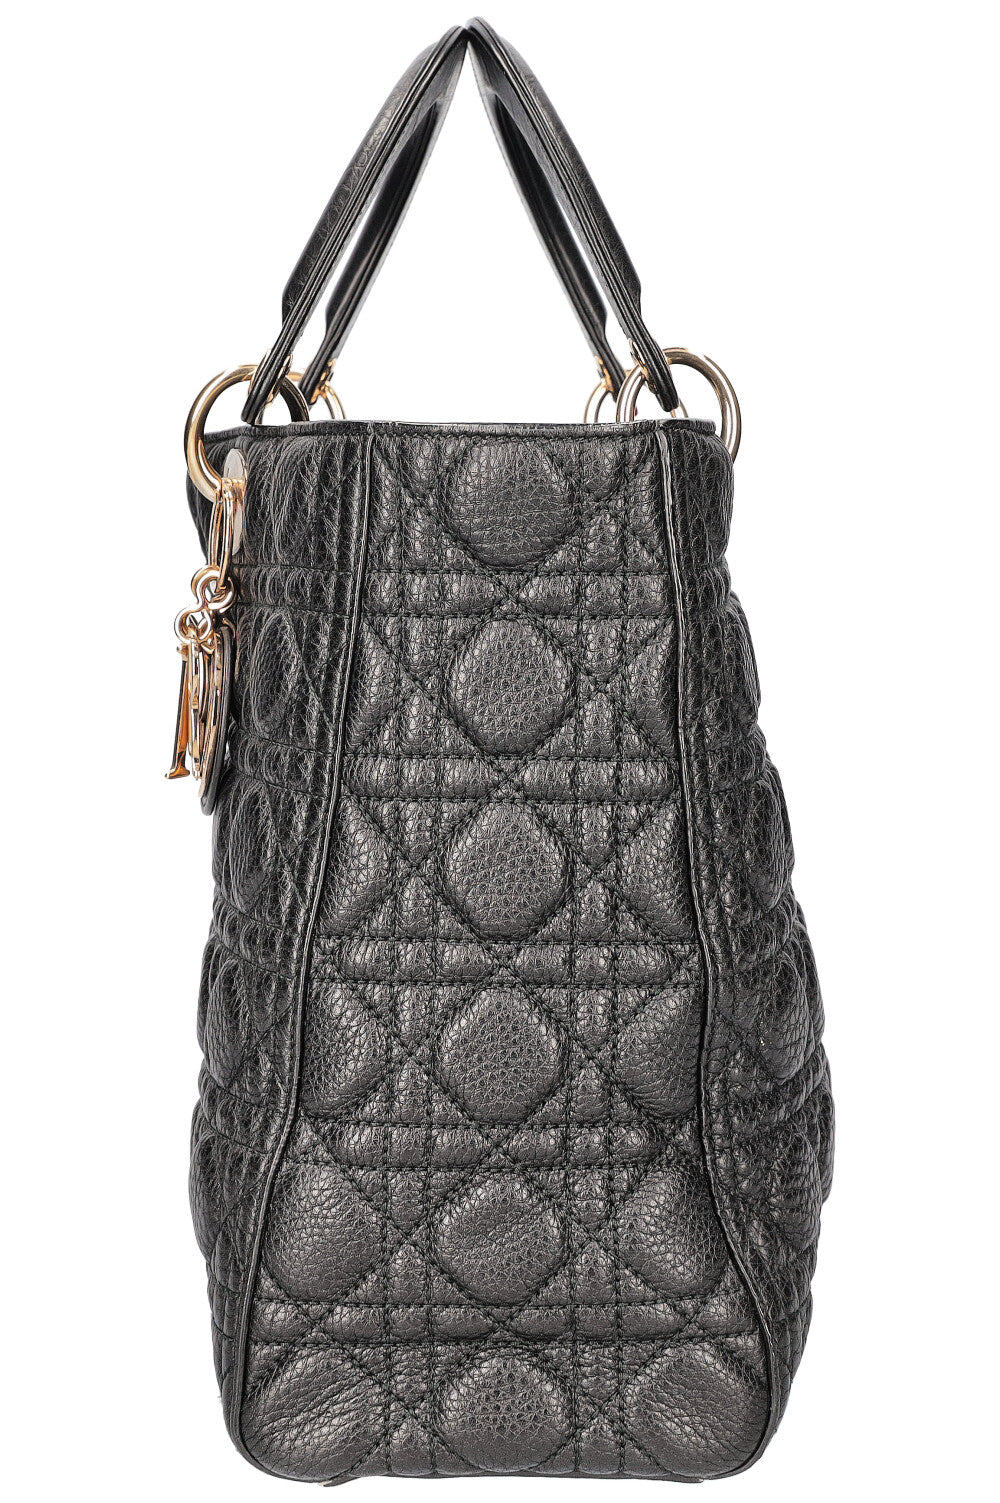 CHRISTIAN DIOR Lady Dior Bag Quilted Grained Calfskin Black